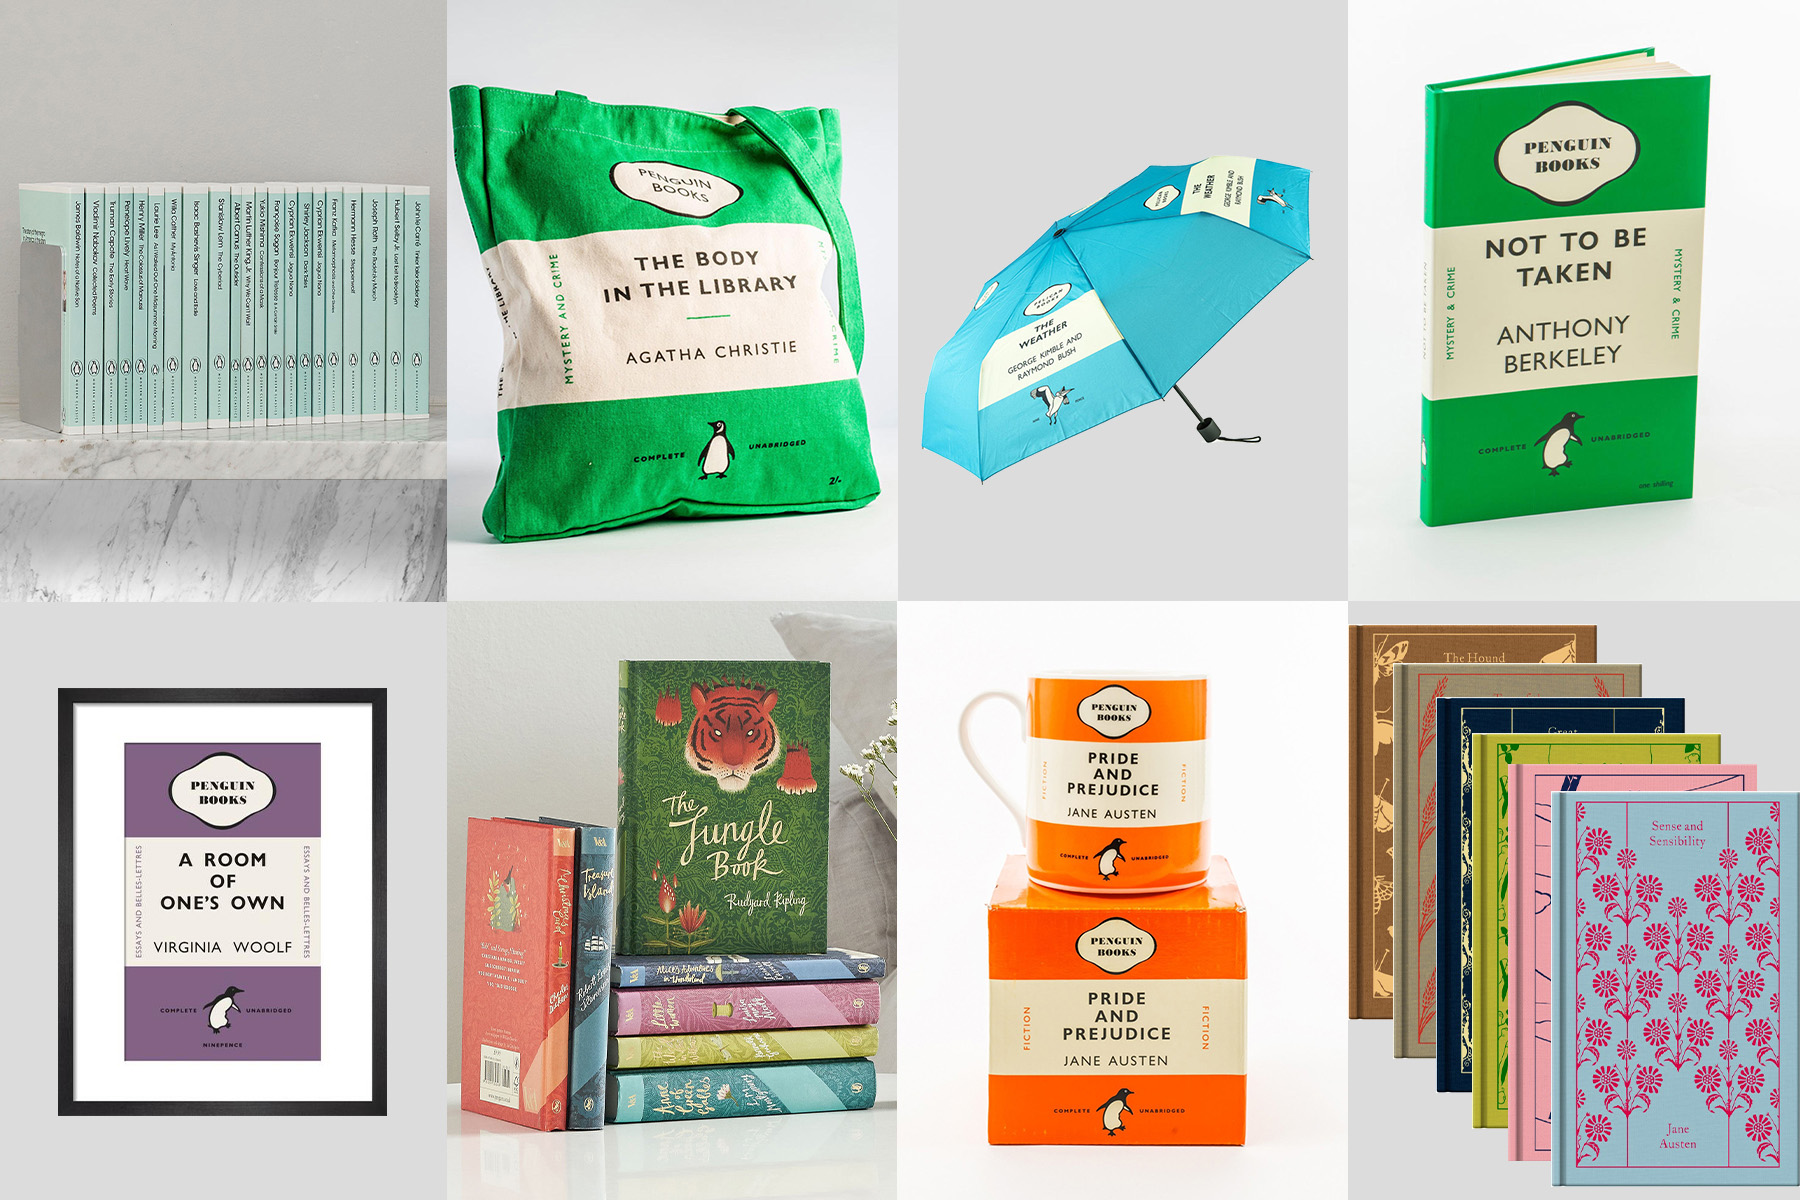 Grid of products from Penguin Shop